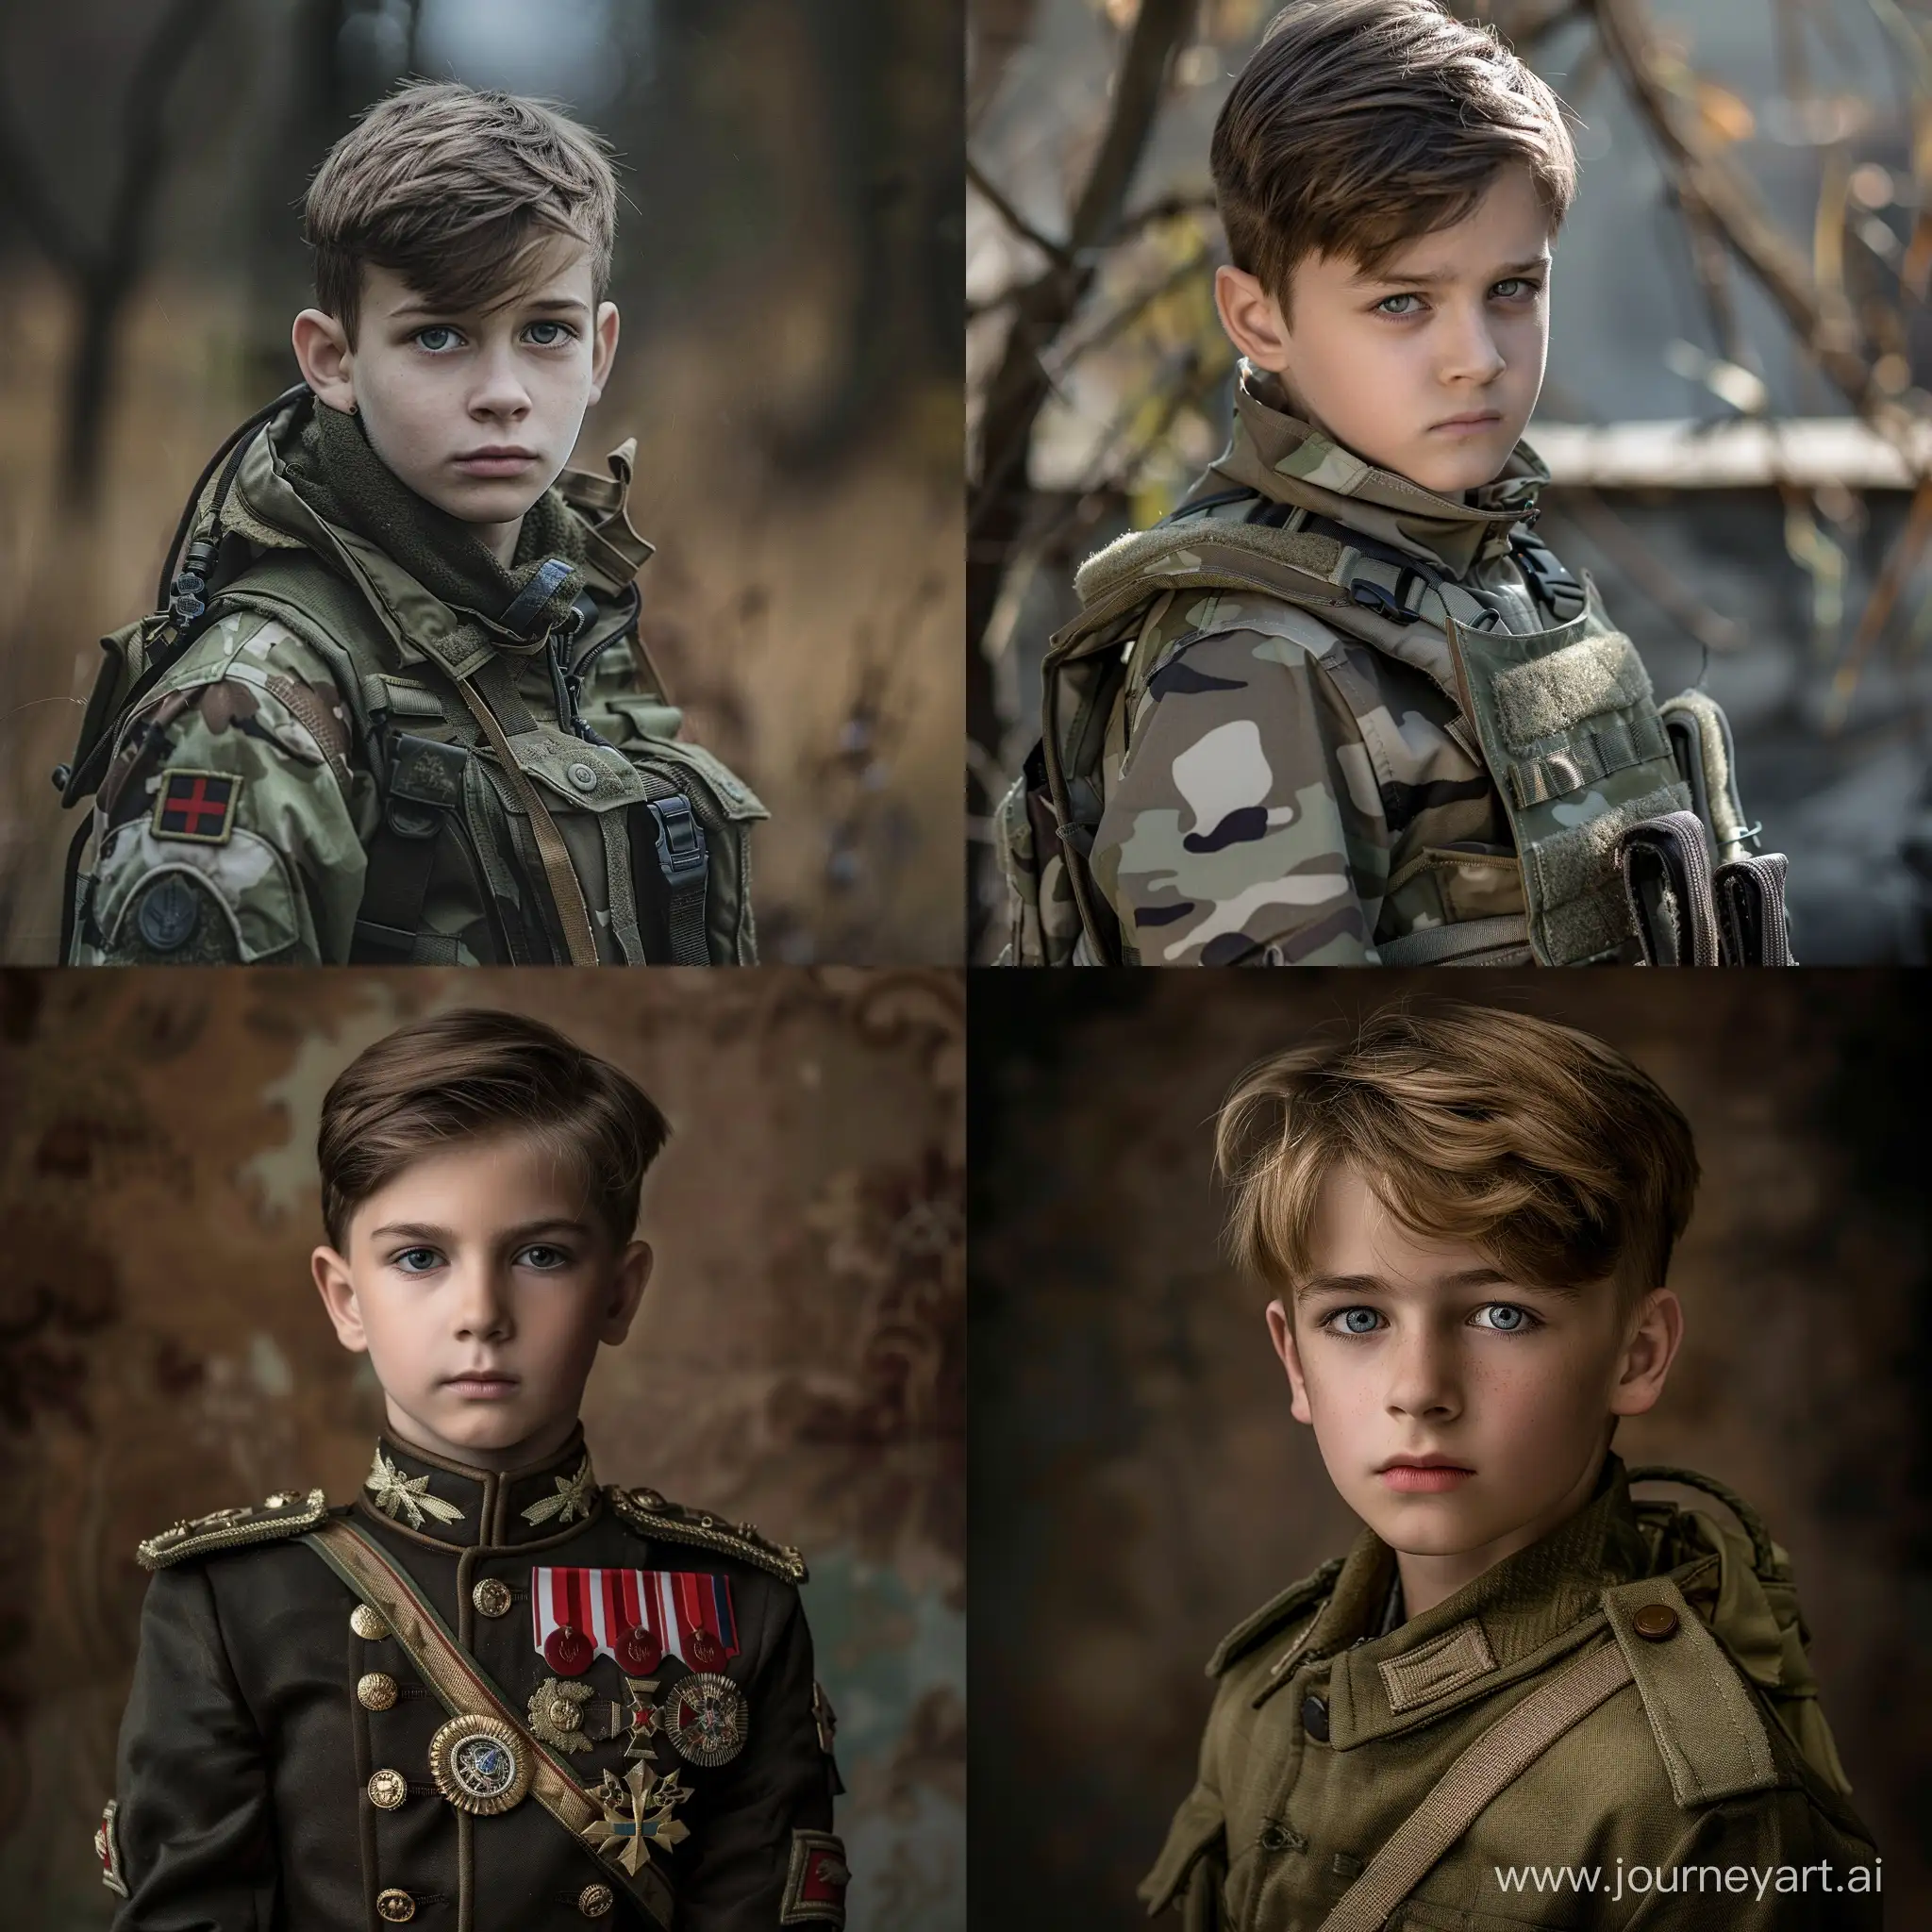 Realistic-Military-Costume-Boy-Photoshoot-with-High-Detail